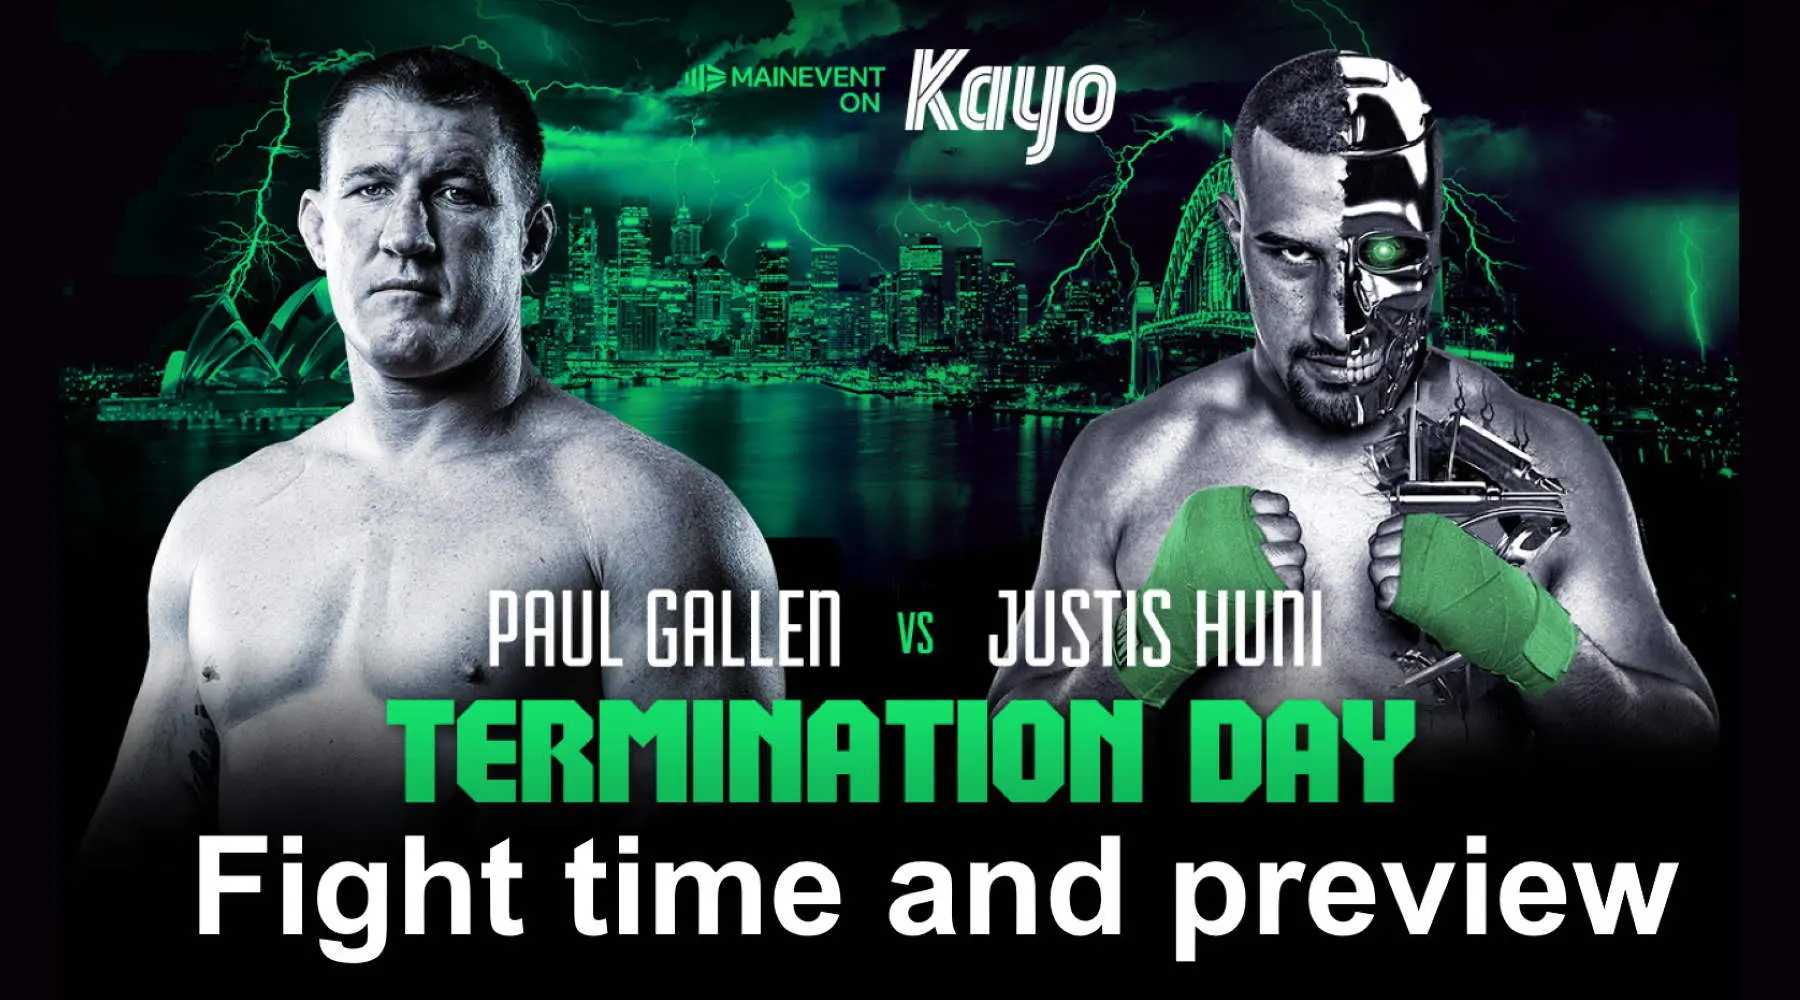 How to watch Paul Gallen vs Justis Huni boxing match live online